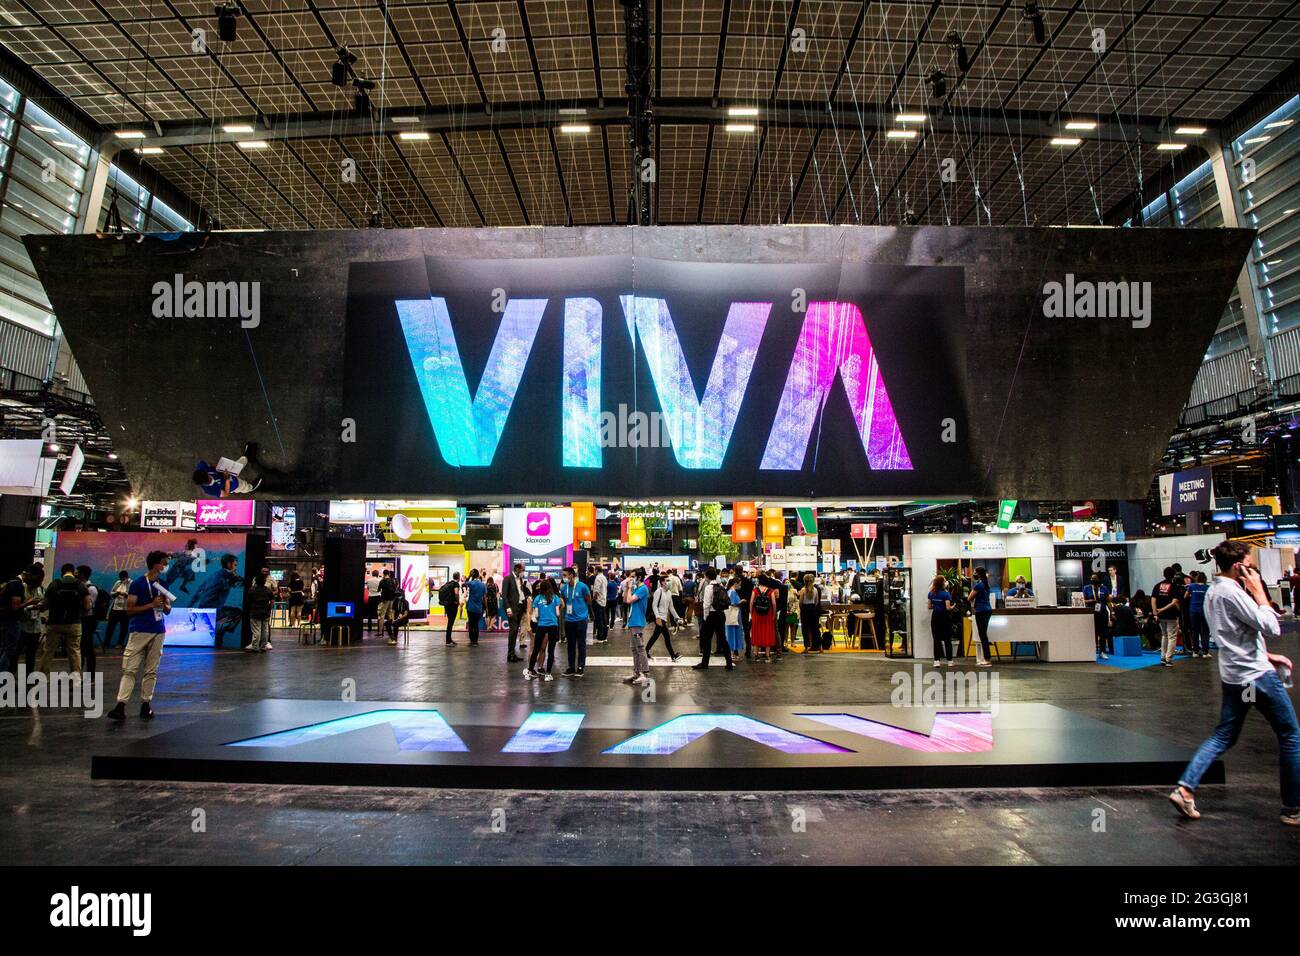 Paris, France. June 16, 2021, 5th Edition Viva Technology. VivaTech 2021 is  the world's rendezvous for startups and leaders to celebrate innovation.  It's a gathering of the world's brightest minds, talents, and